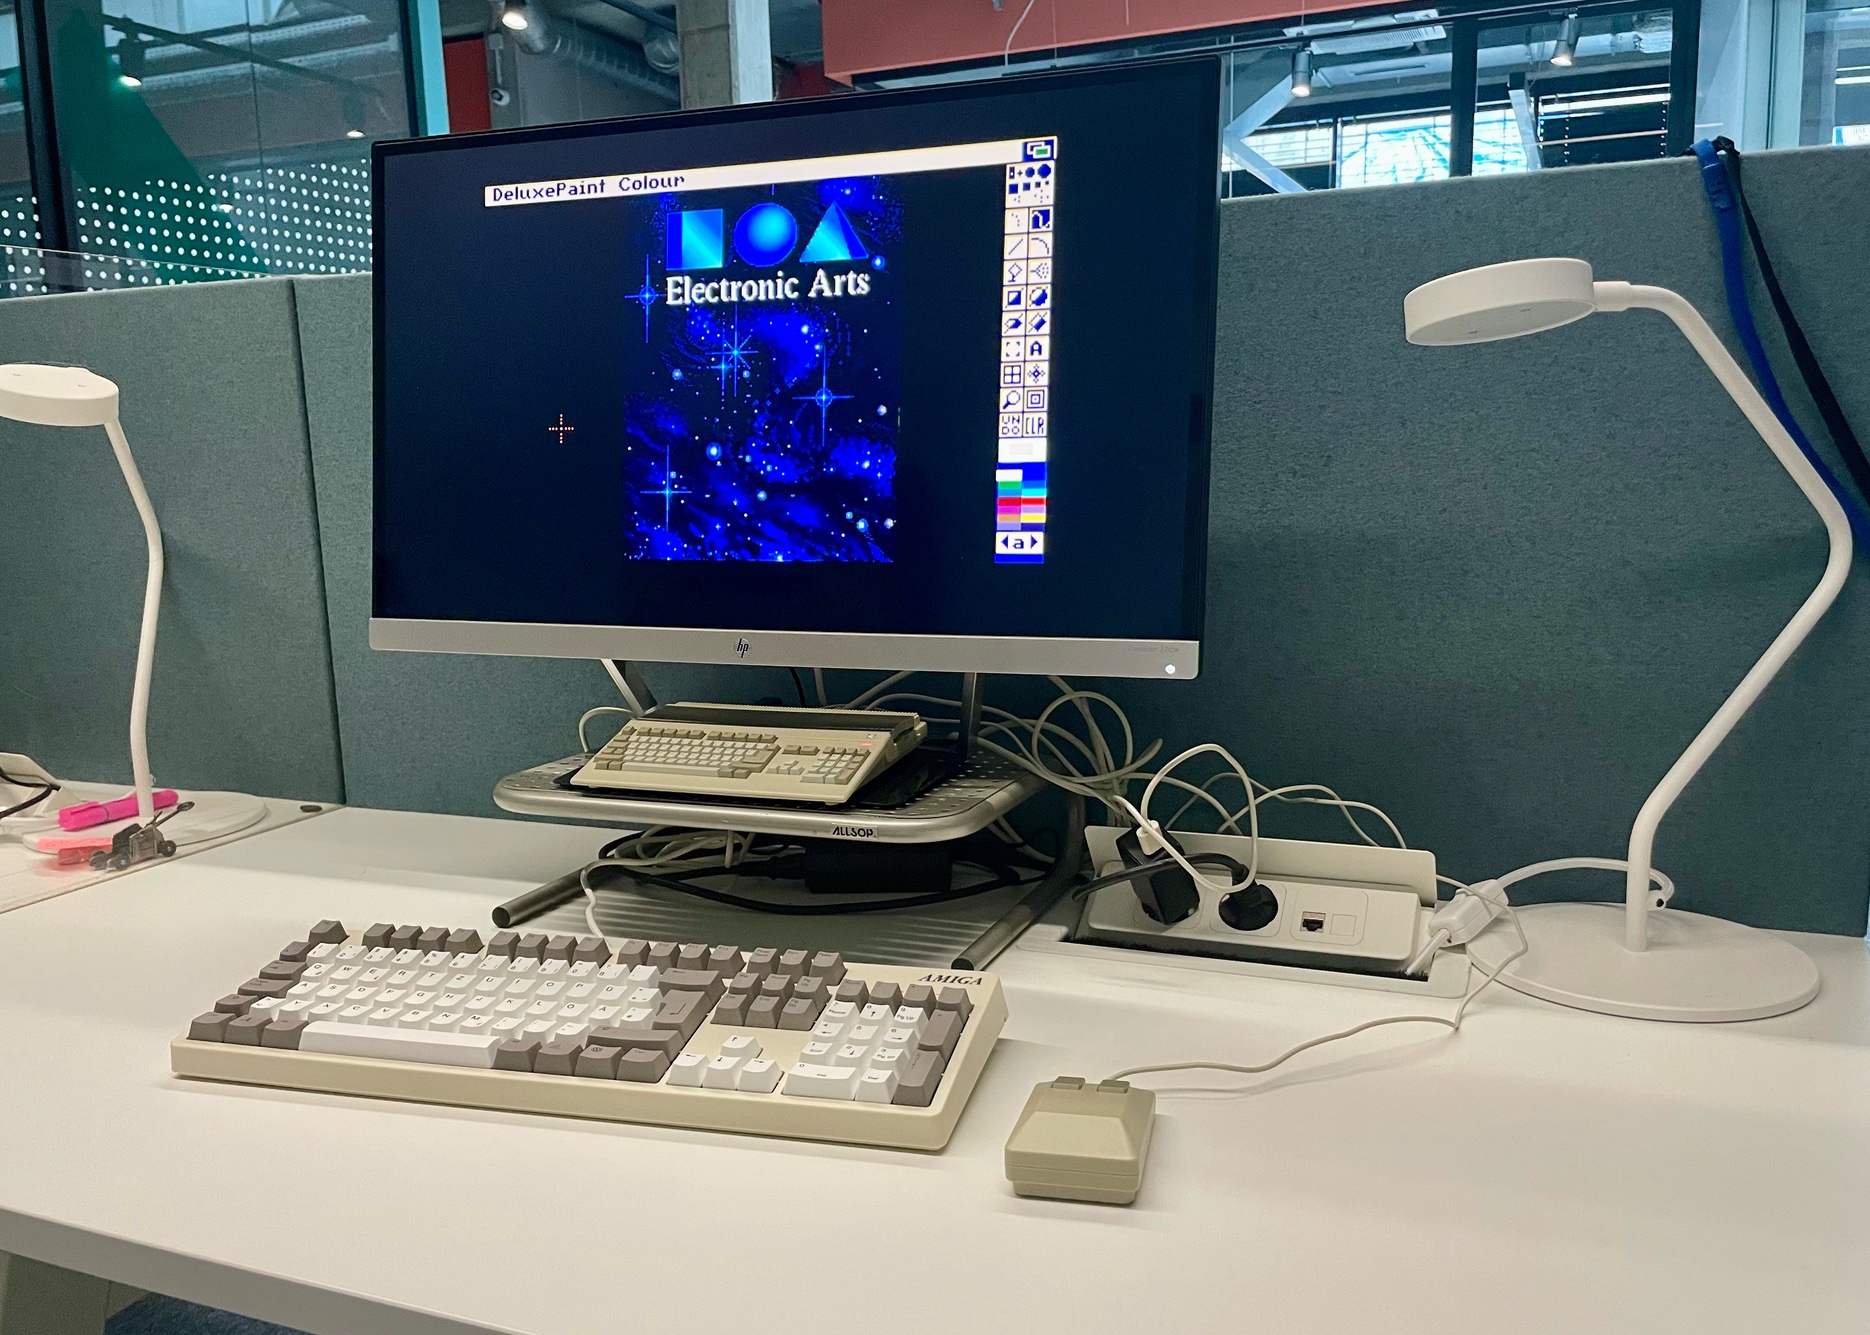 Photo of an A500 mini with an Amiga keyboard by Simulant that resembles the original keyboard of the Amiga 1000